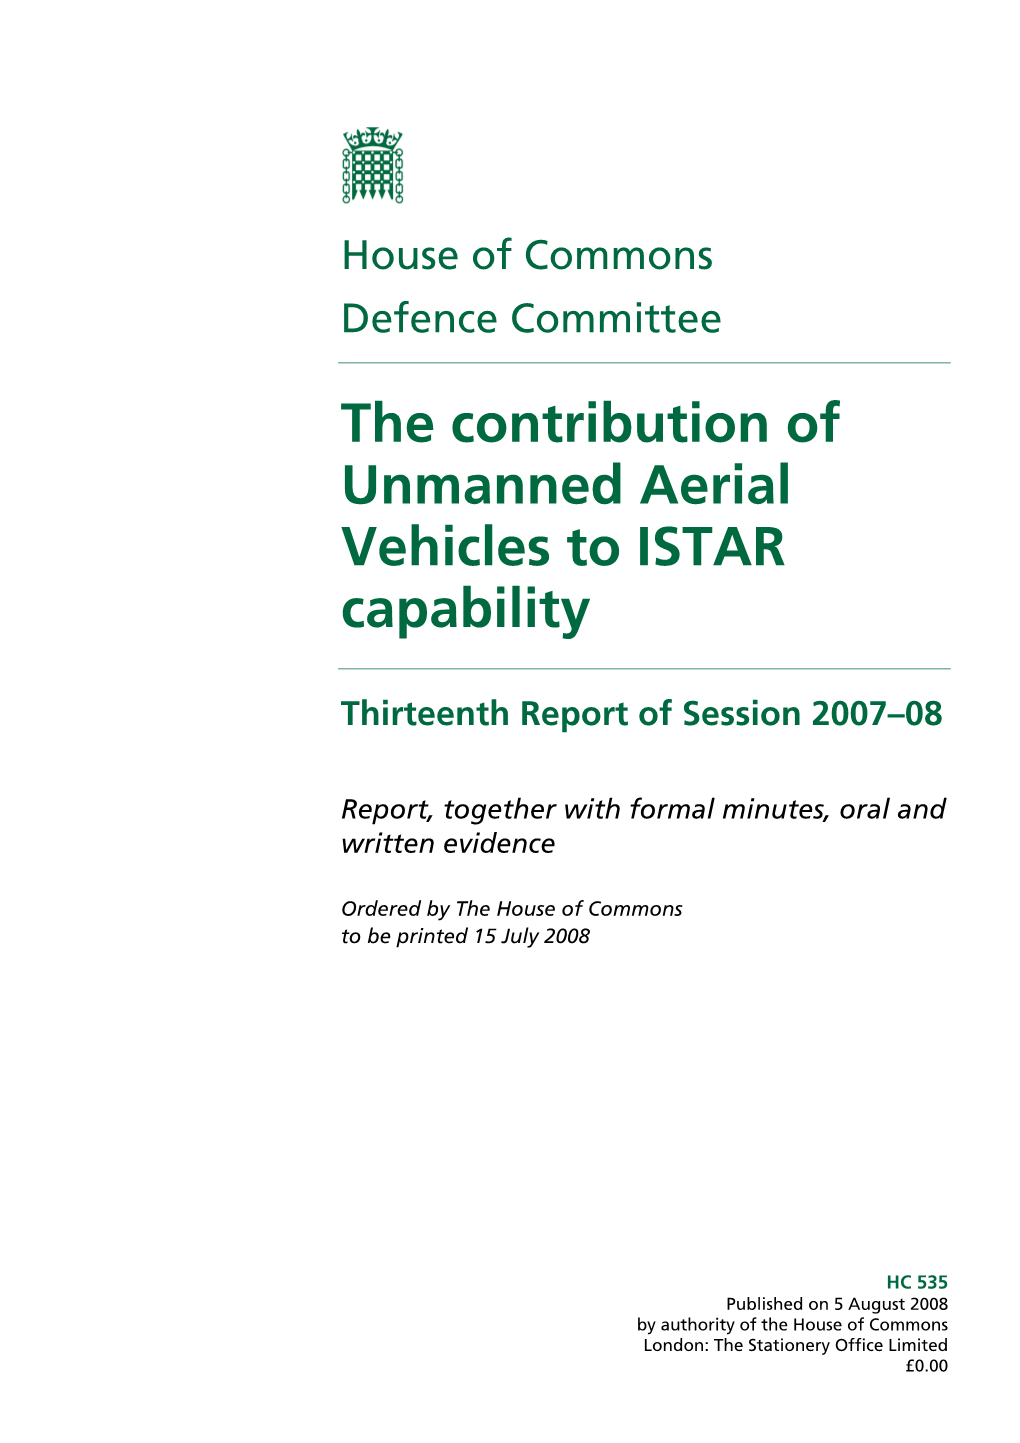 The Contribution of Unmanned Aerial Vehicles to ISTAR Capability